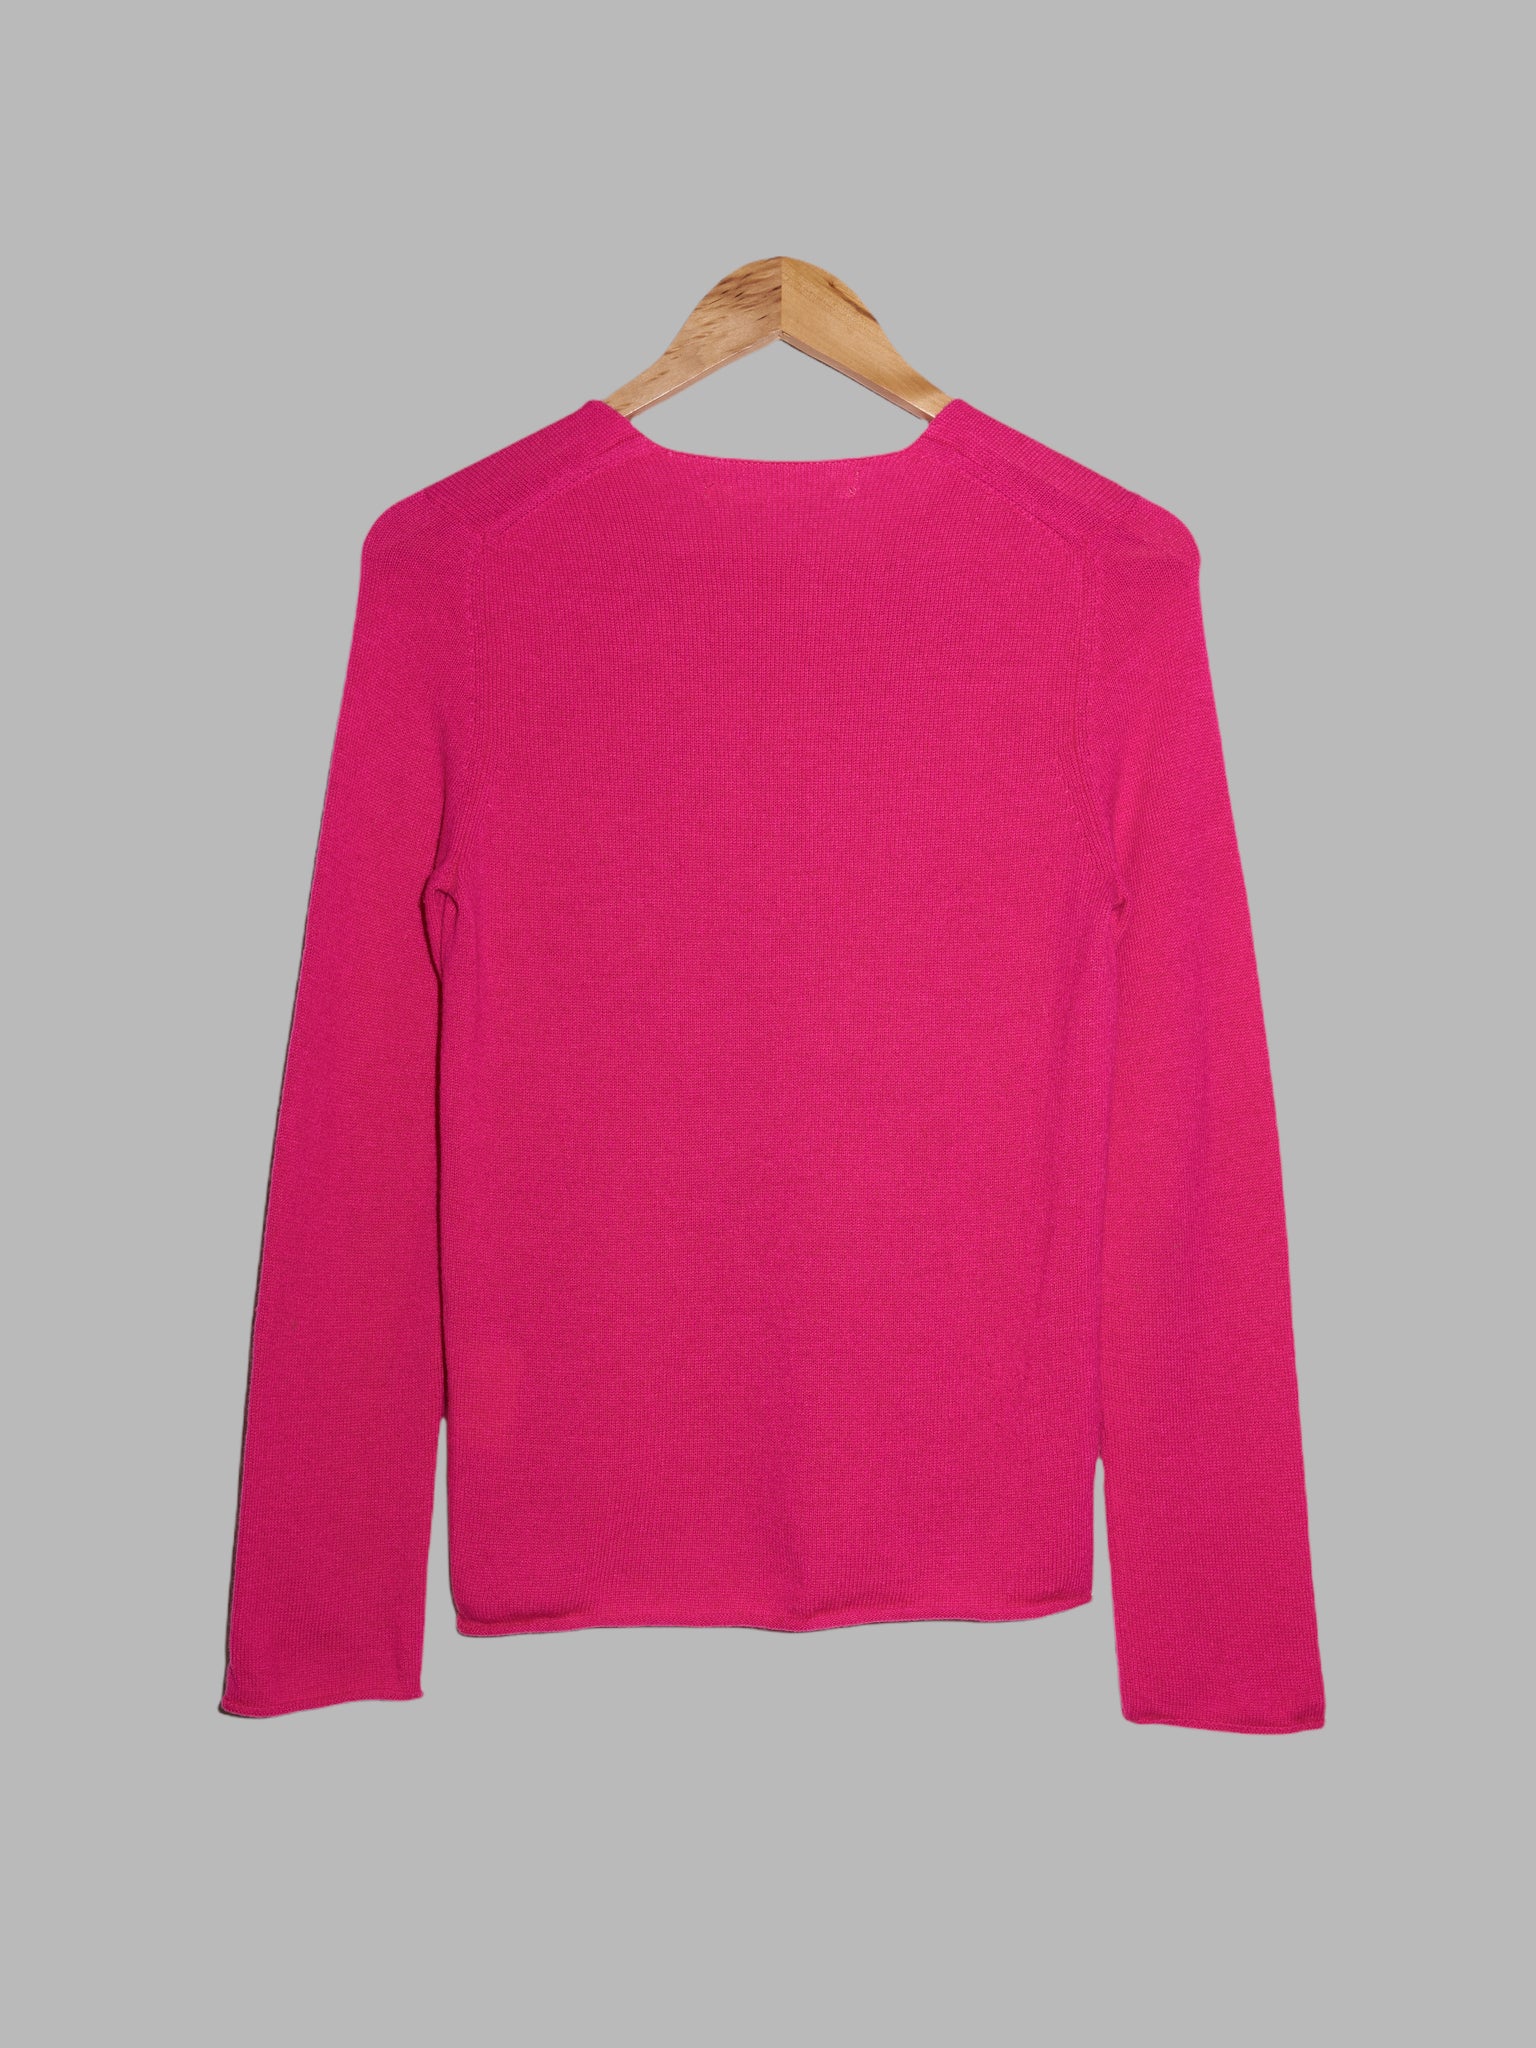 Comme des Garcons AW2000 pink wool knit sweater with eyes on front